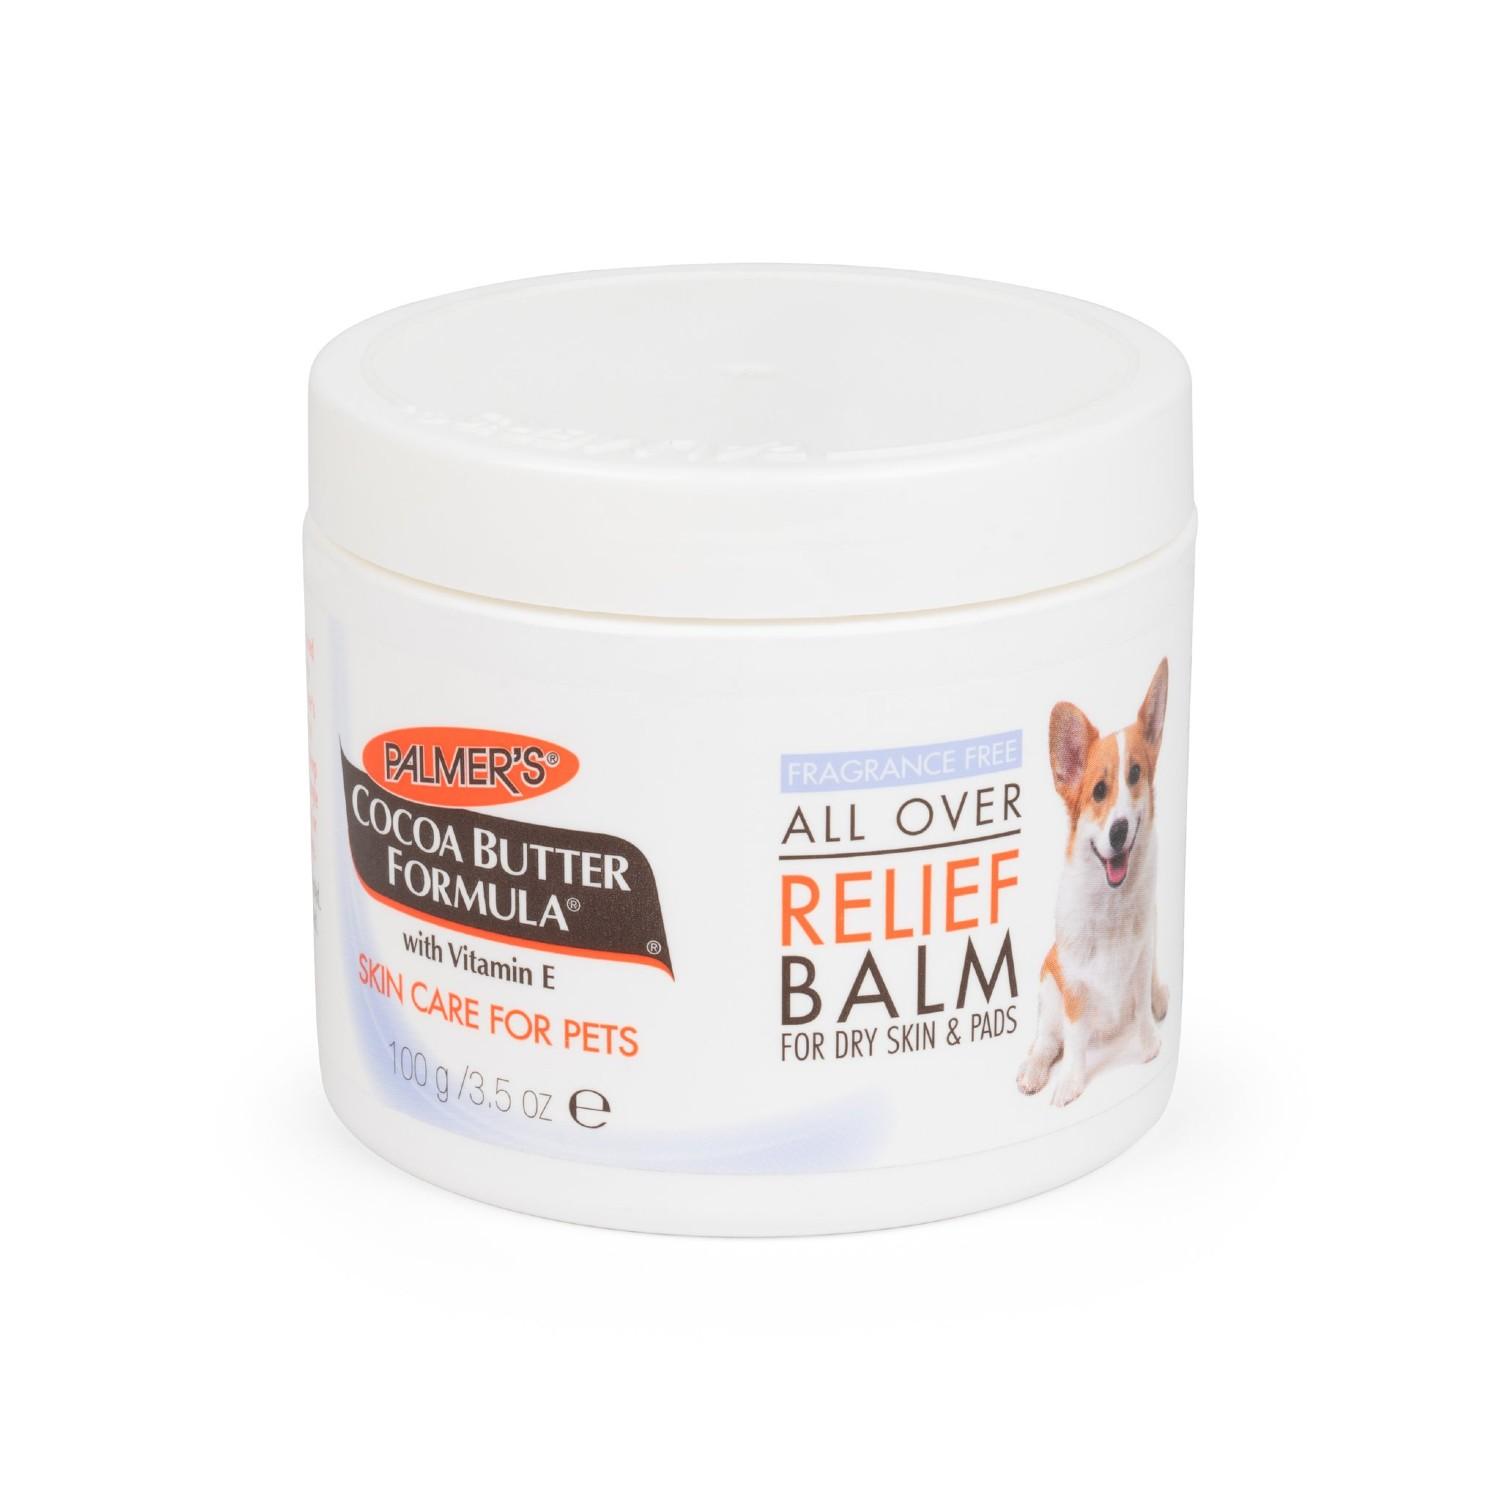 Palmer's for Pets All Over Relief Balm or Dogs & Cats with Cocoa Butter